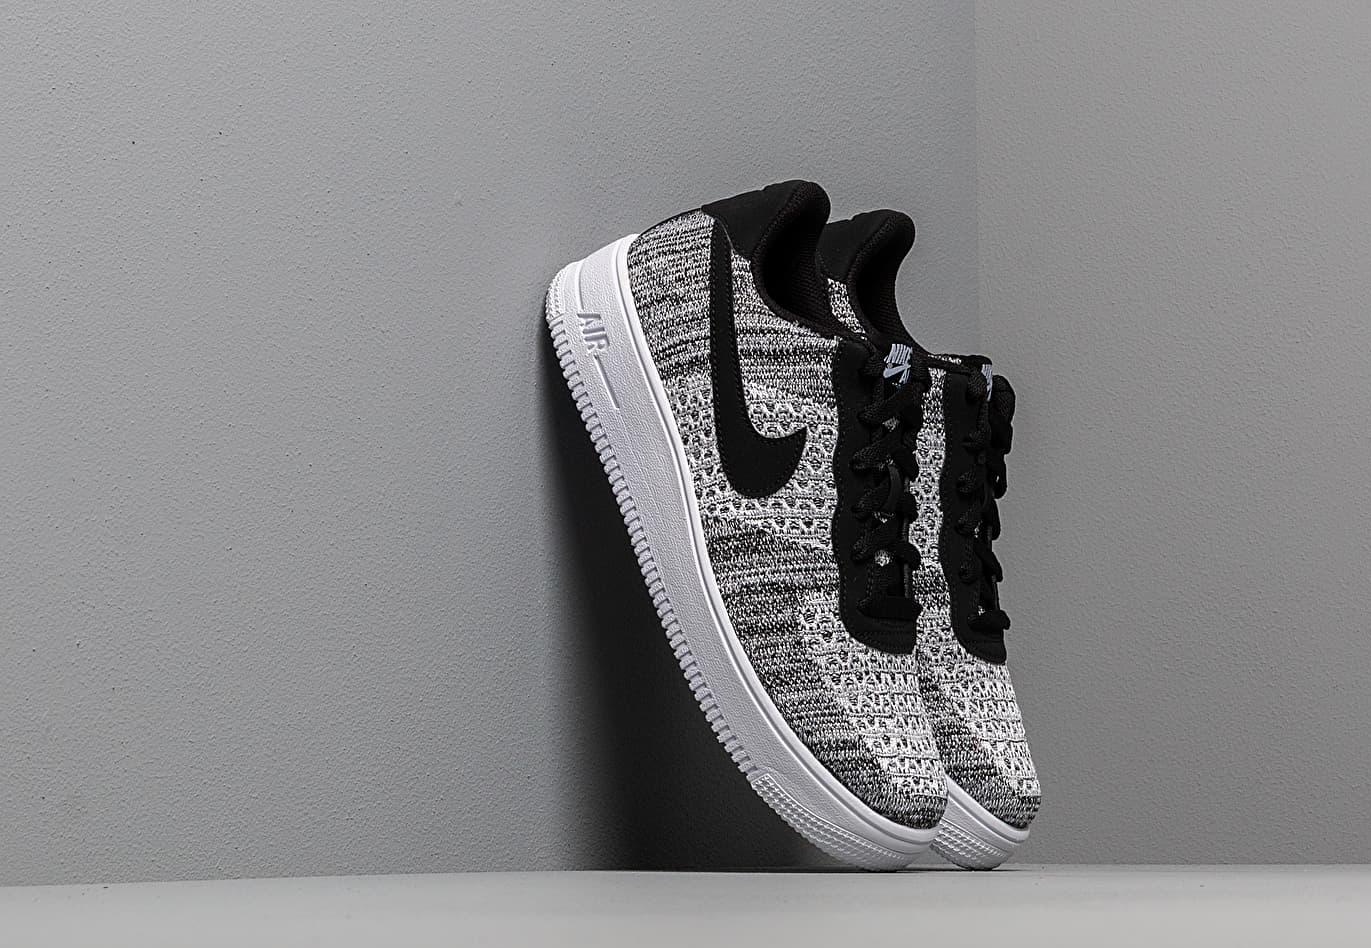 nike air force 1 flyknit 2.0 pure platinum